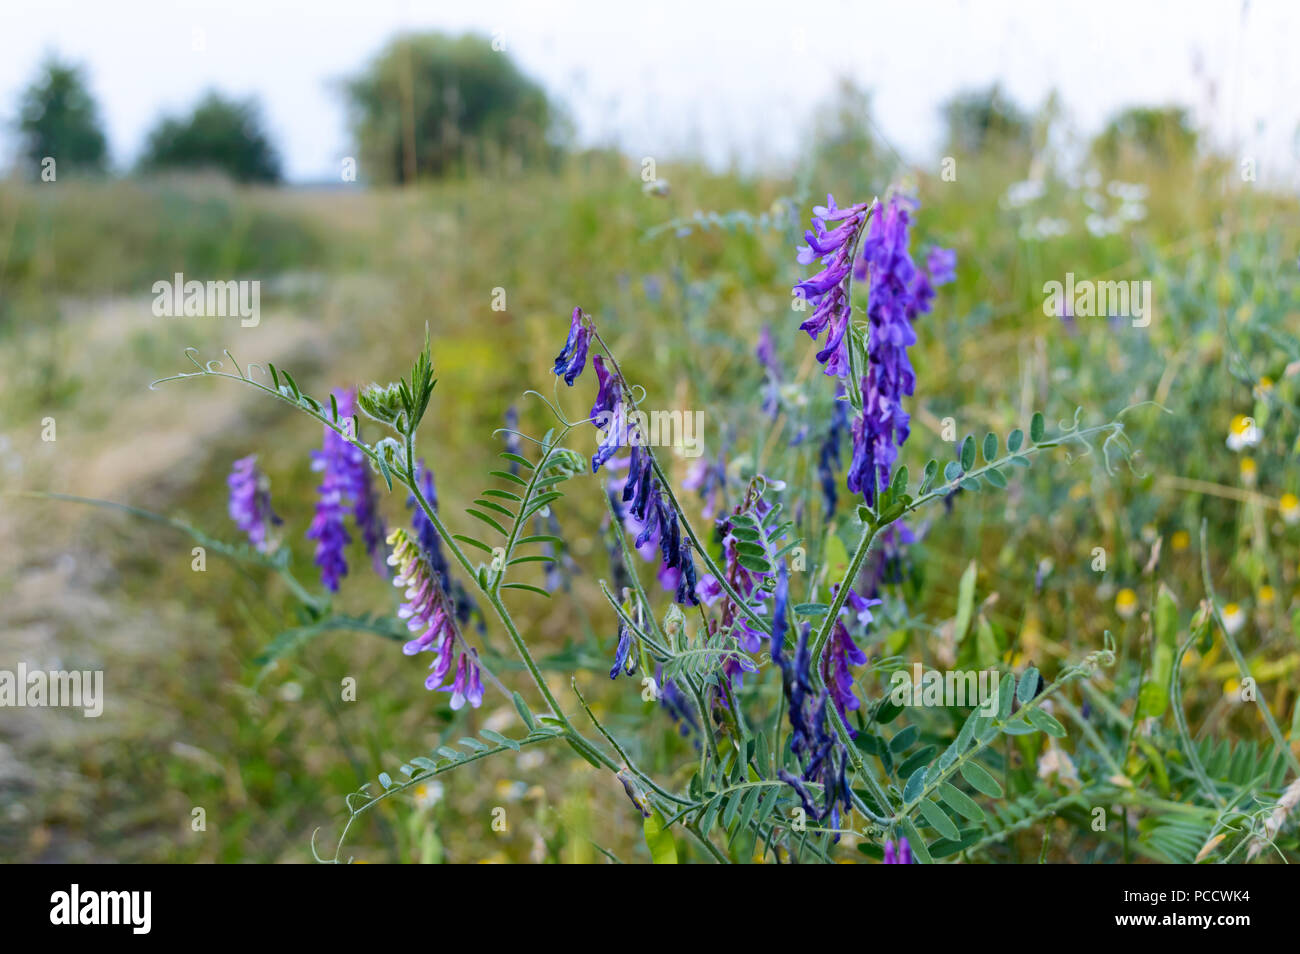 Meadow flowers along the steppe road. Selective focus Stock Photo